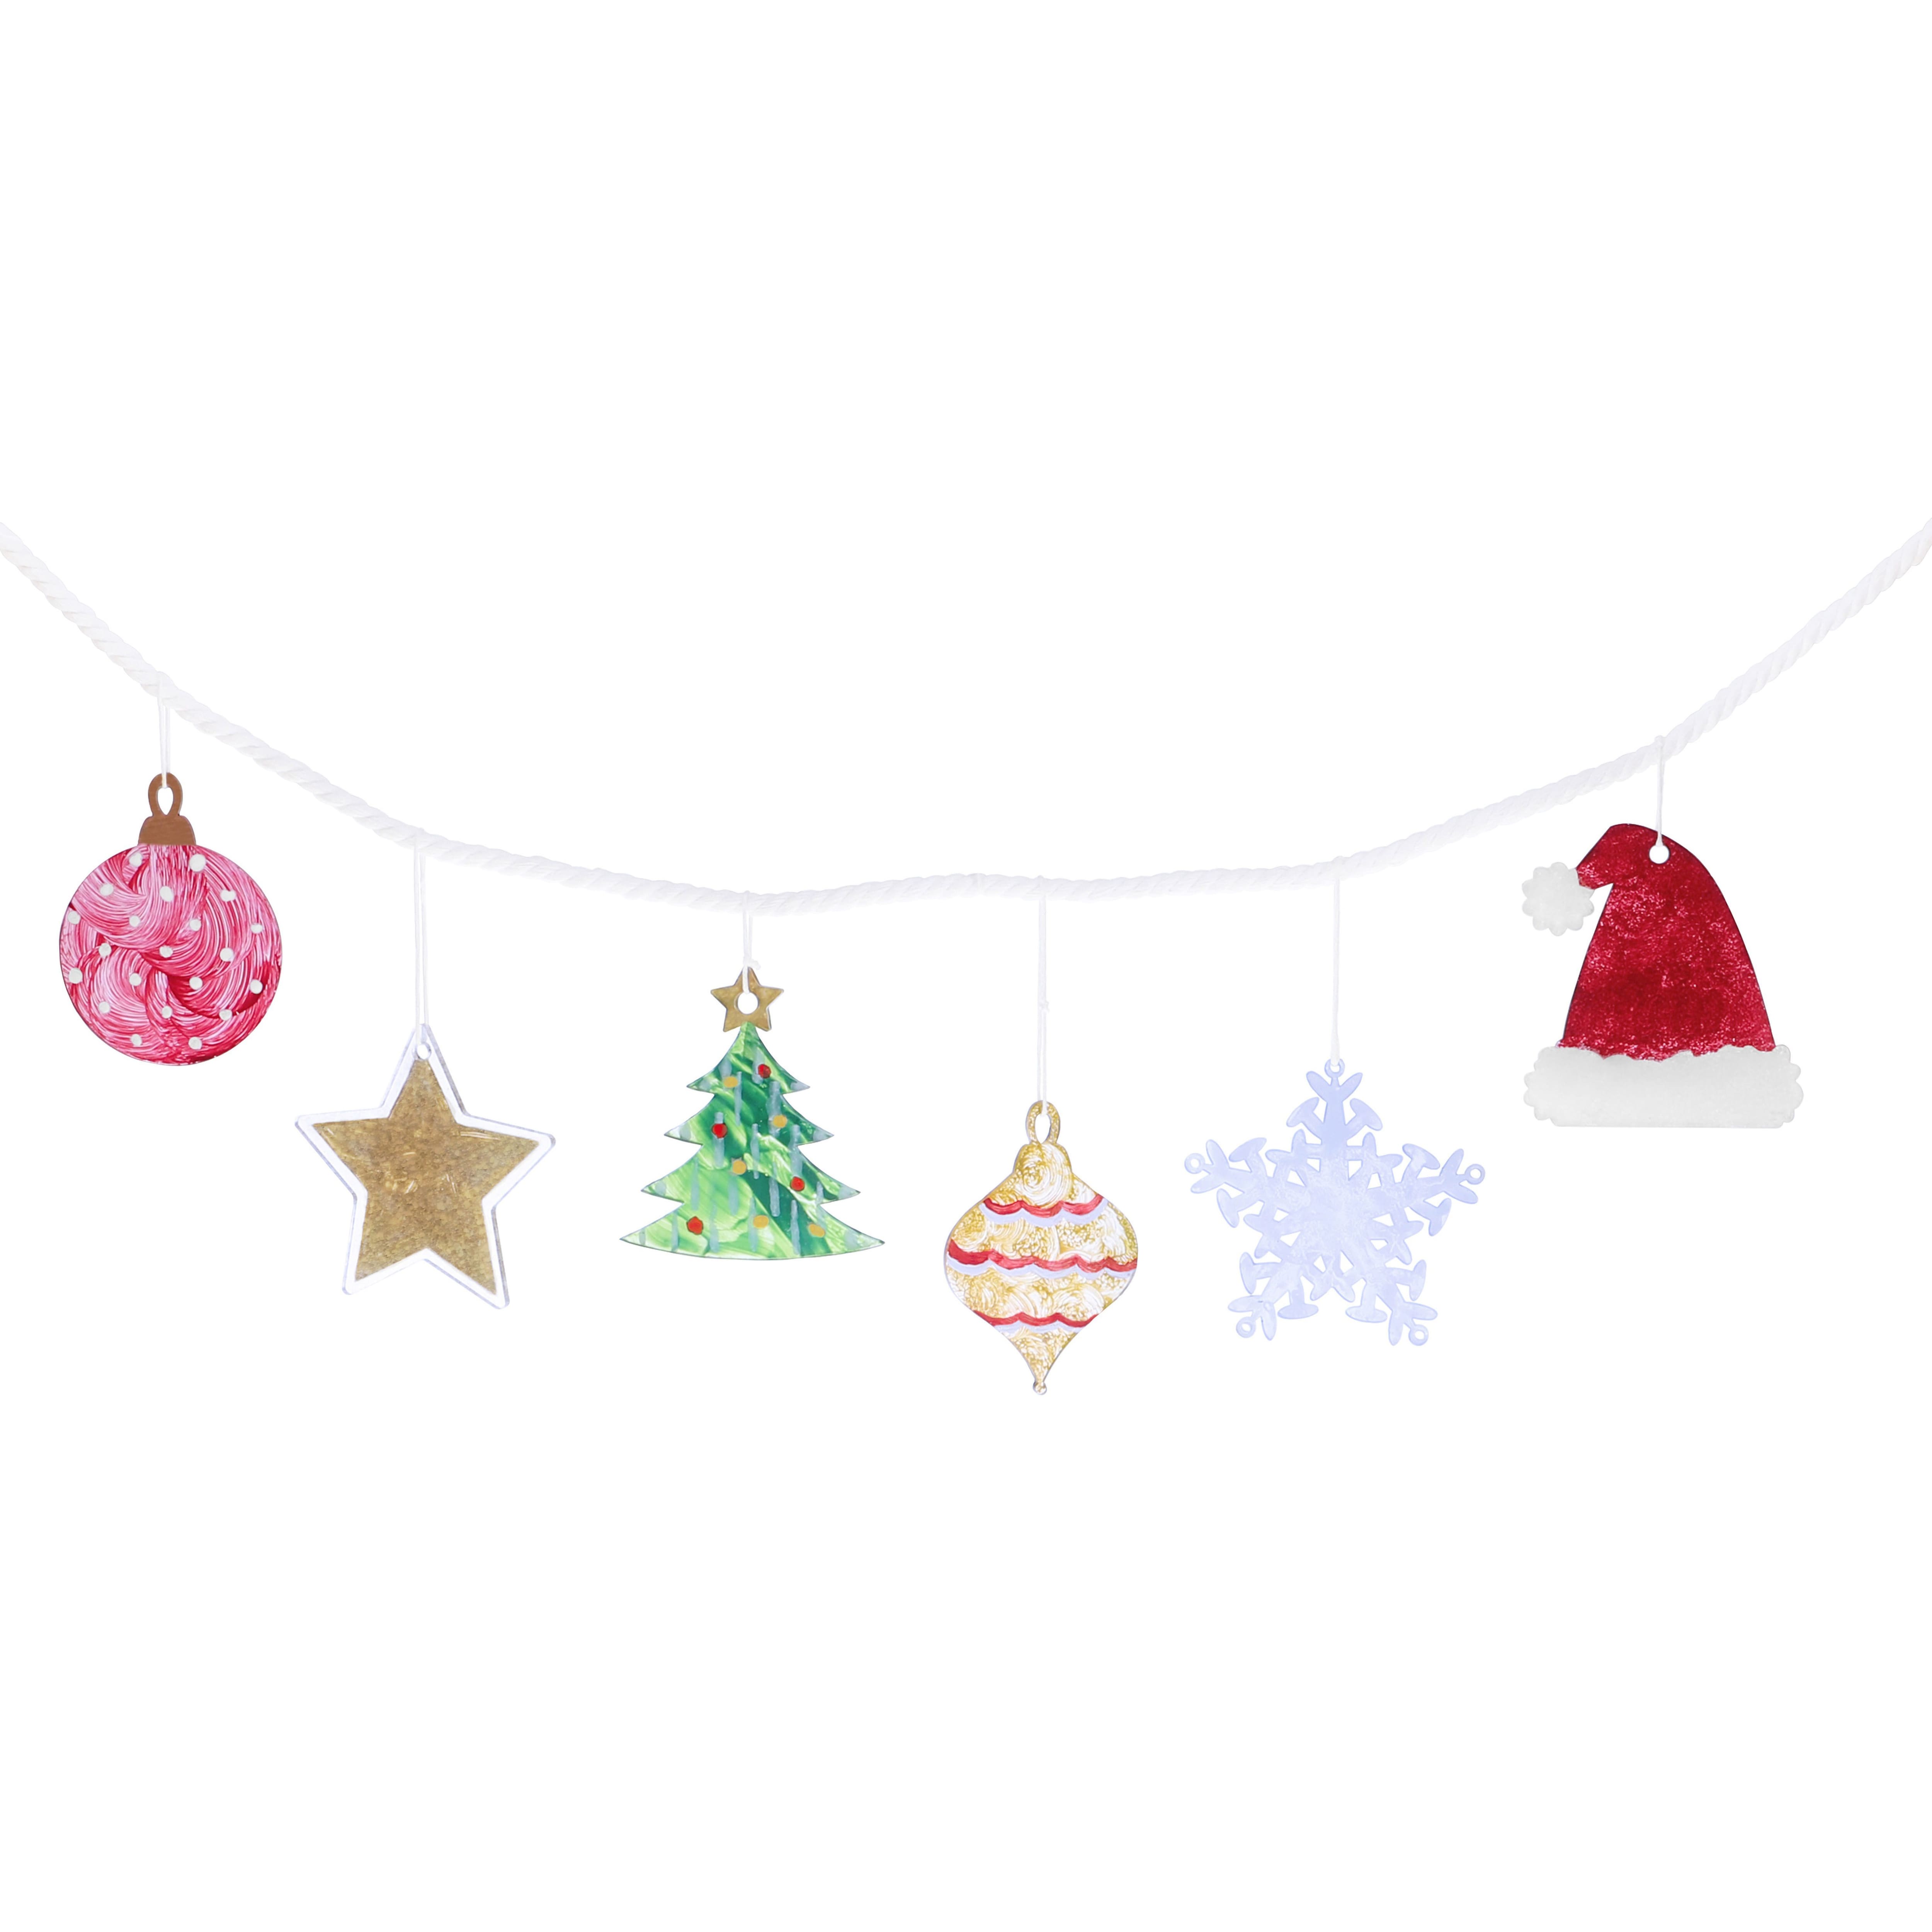 Essentials by Leisure Arts Assorted Holiday Clear Acrylic Ornaments, 10ct.